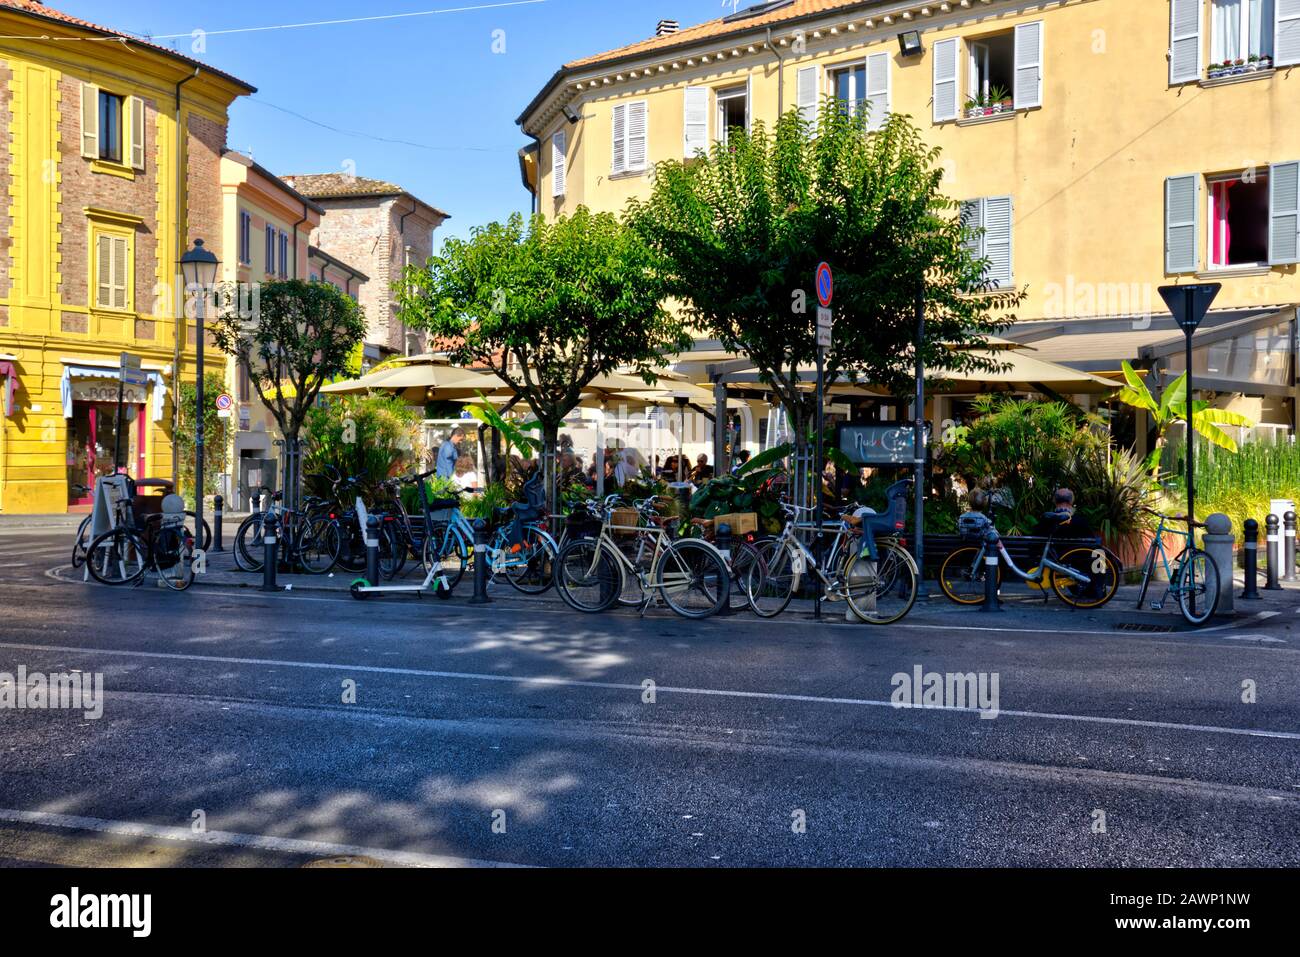 Rimini, Italy - October 20, 2019: Group of people eat and drink outside cafe with numerous parked bicycles and an e-scooter Stock Photo